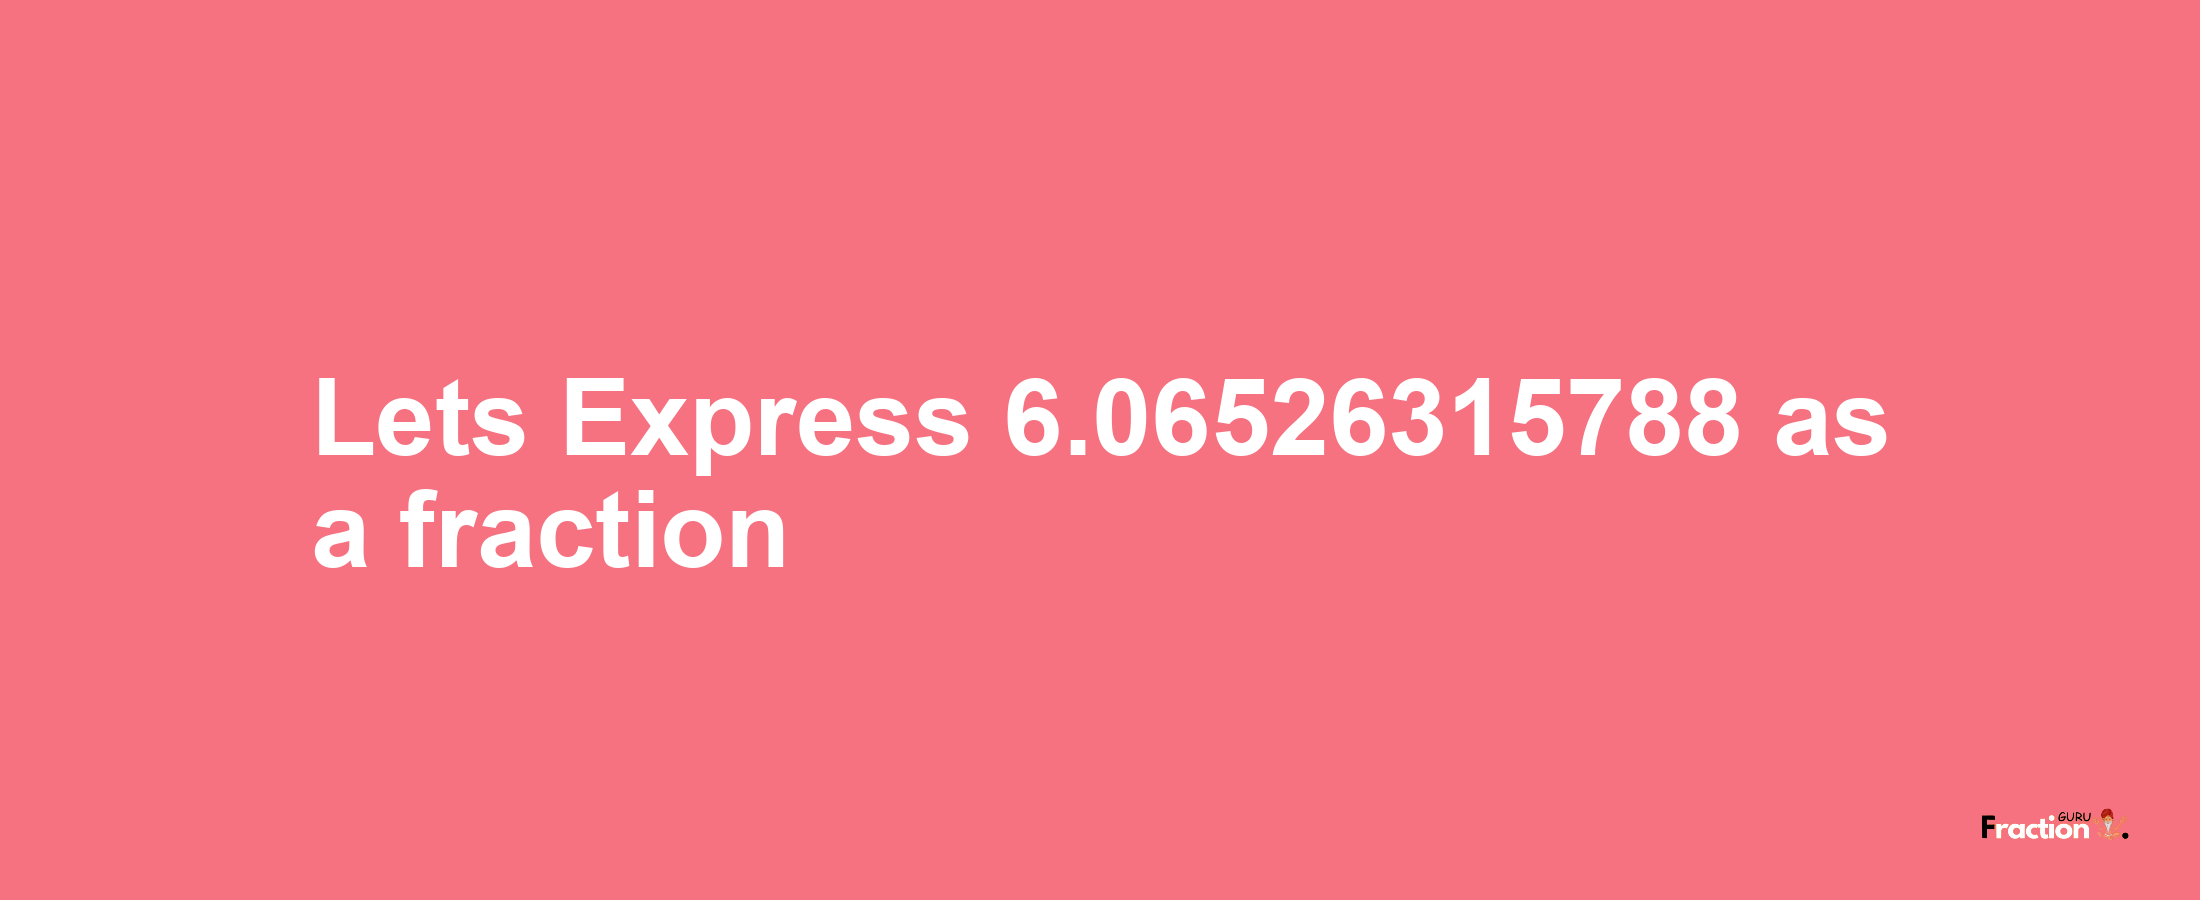 Lets Express 6.06526315788 as afraction